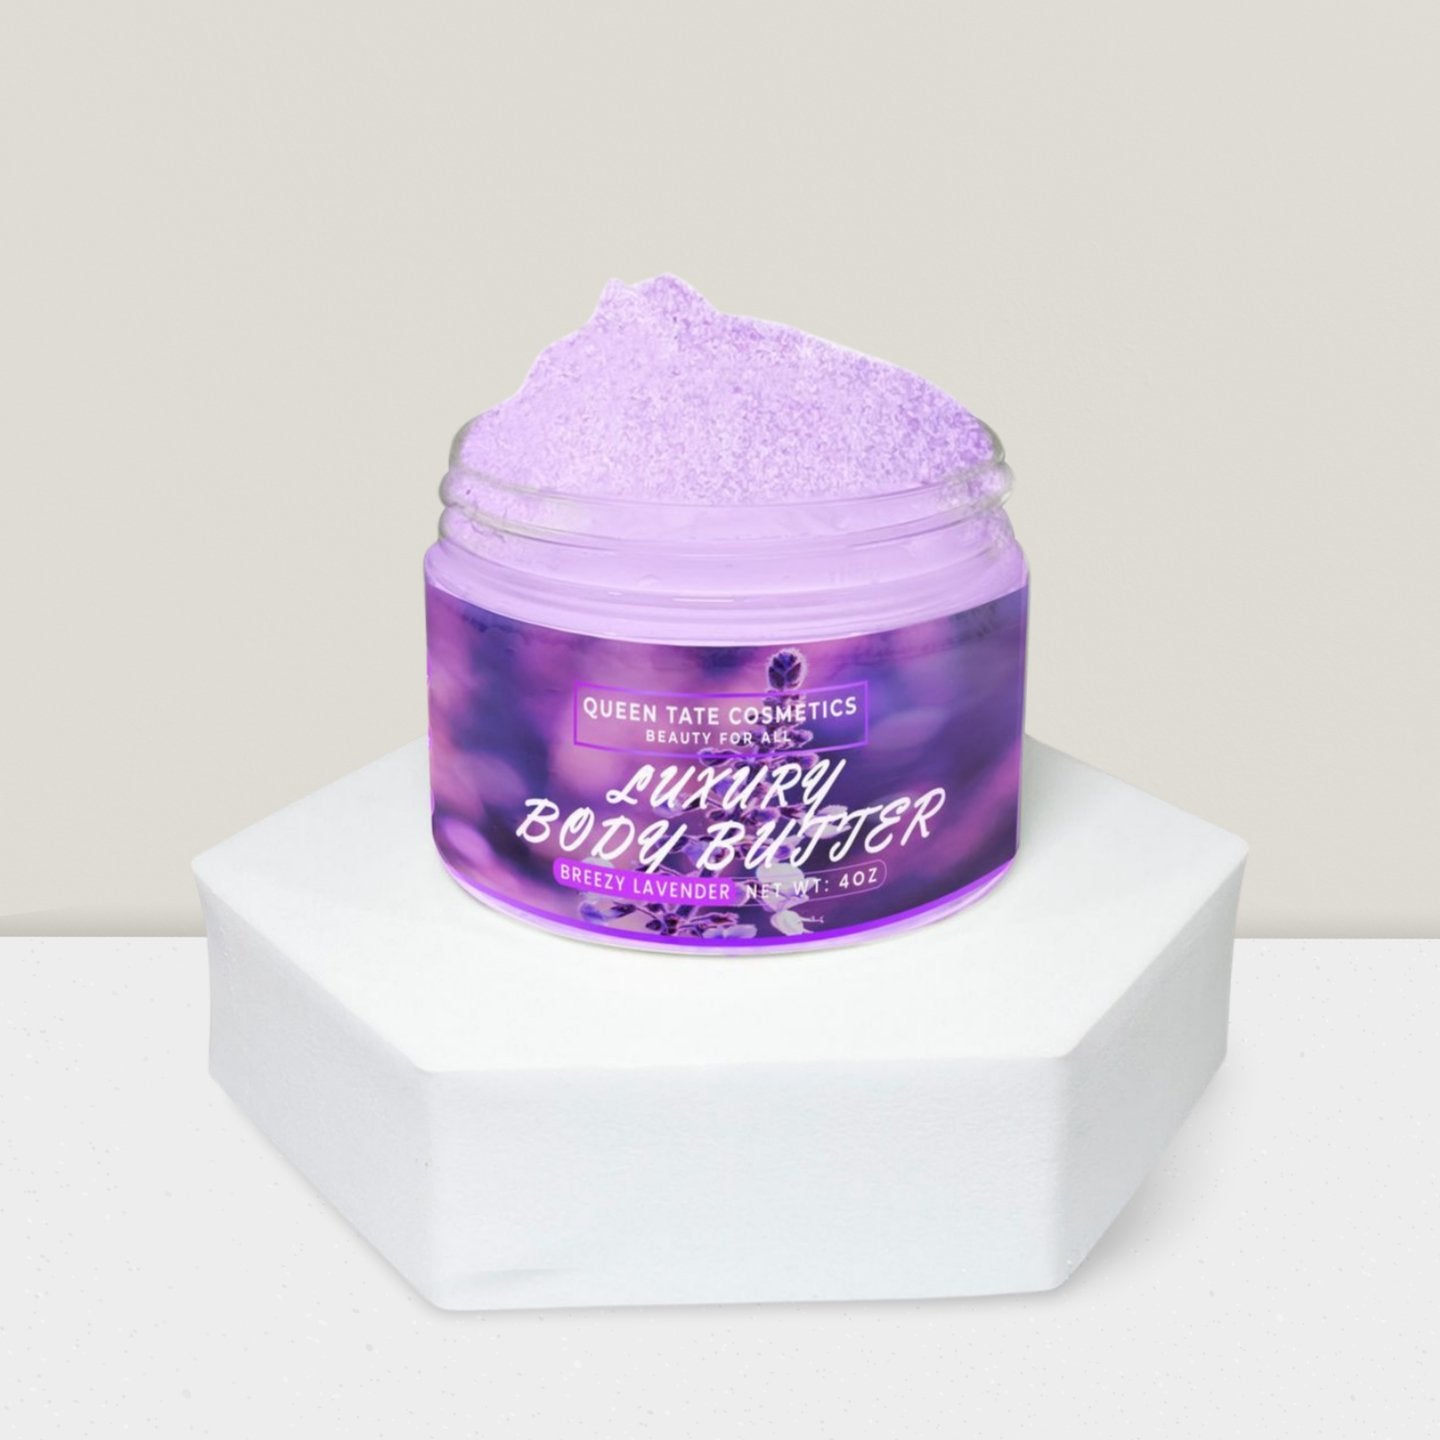 Breezy Lavender-Handcrafted Body Butter - Queen Tate CosmeticsHandcrafted Luxury Body ButterBreezy Lavender-Handcrafted Body ButterHandcrafted Luxury Body ButterQueen Tate Cosmetics 4 oz